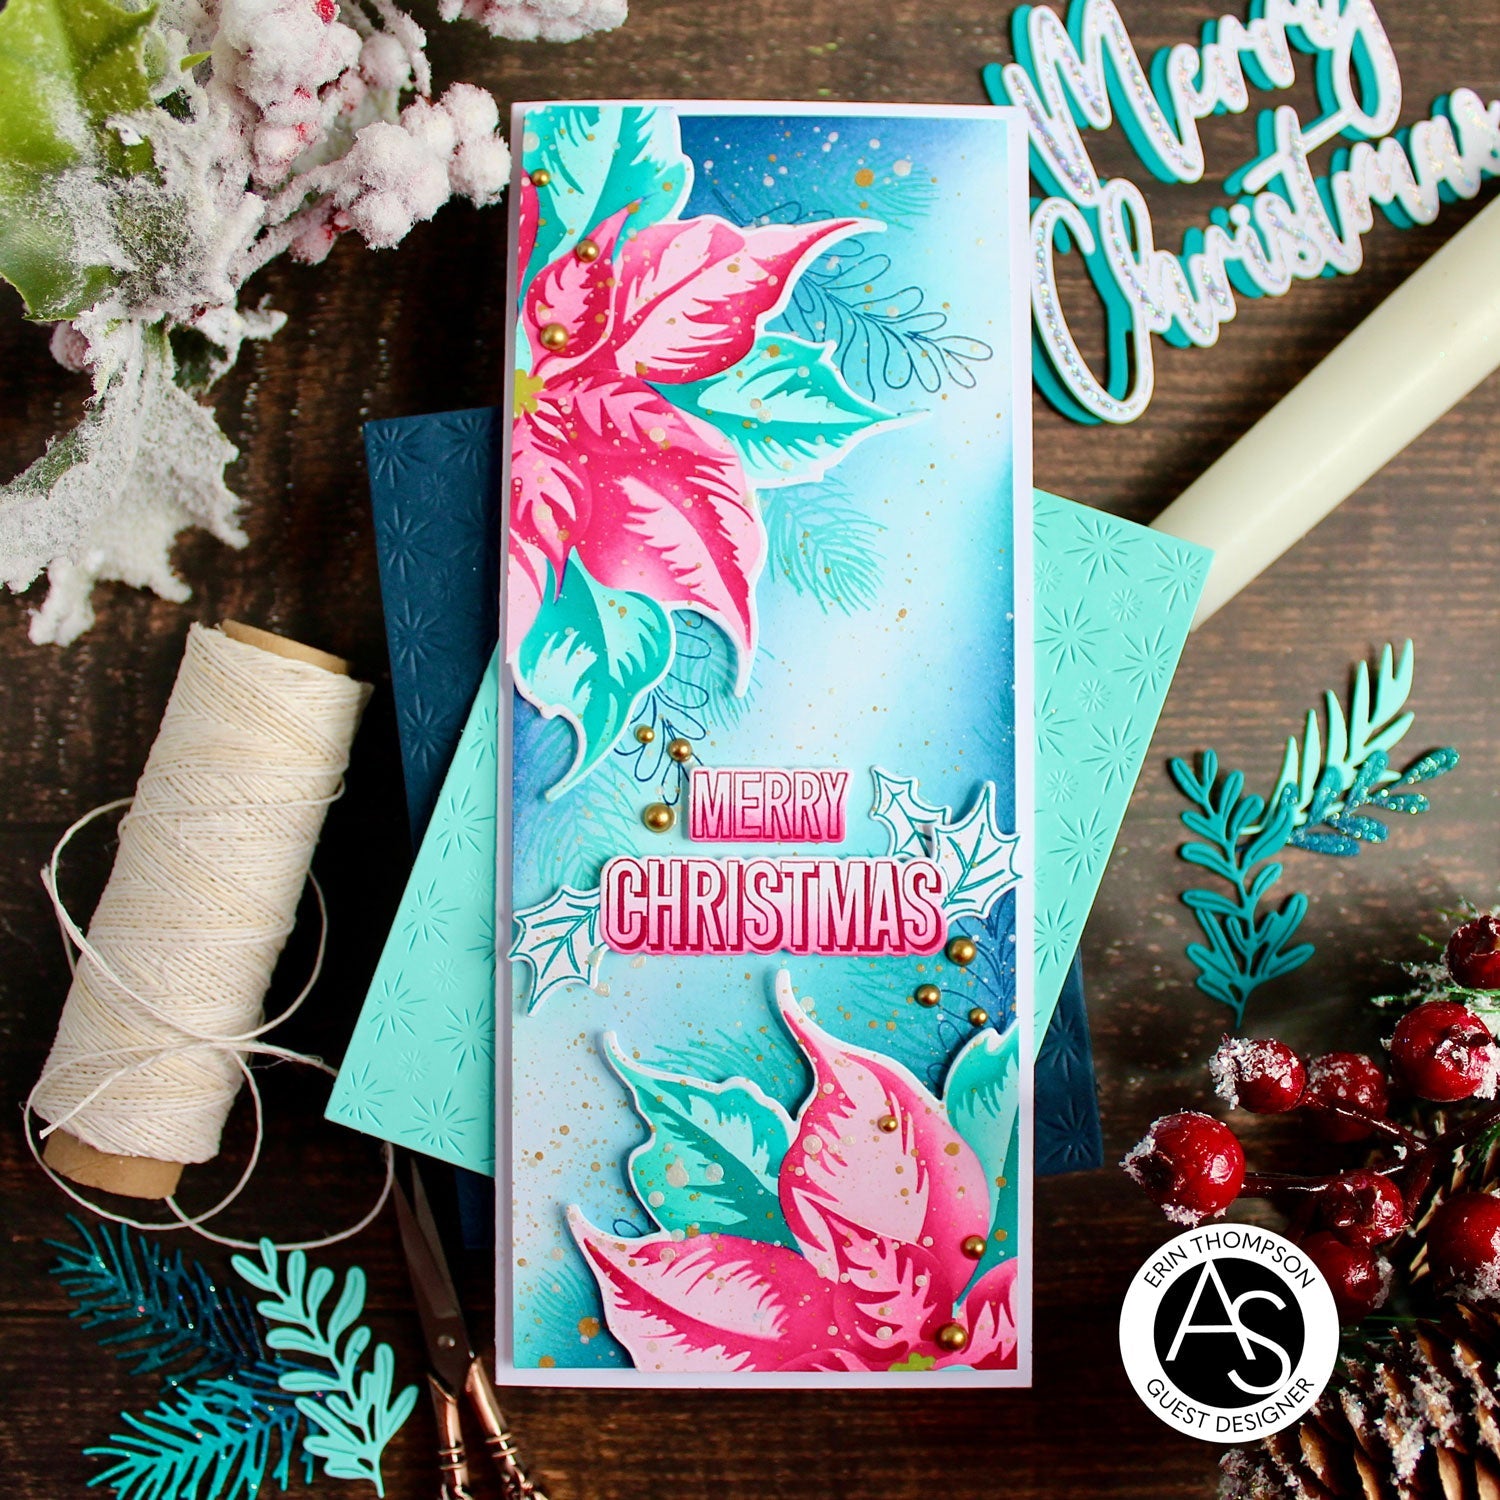 festive-poinsettia-alex-syberia-designs-stamps-dies-stencil-hotfoil-scrapbooking-christmas-holiday-collection-newyear-handmade-coloring-tutorial-scrapbooking-album-stencils-cardmaking-greeting-cards-ink-blending-hot-foiling